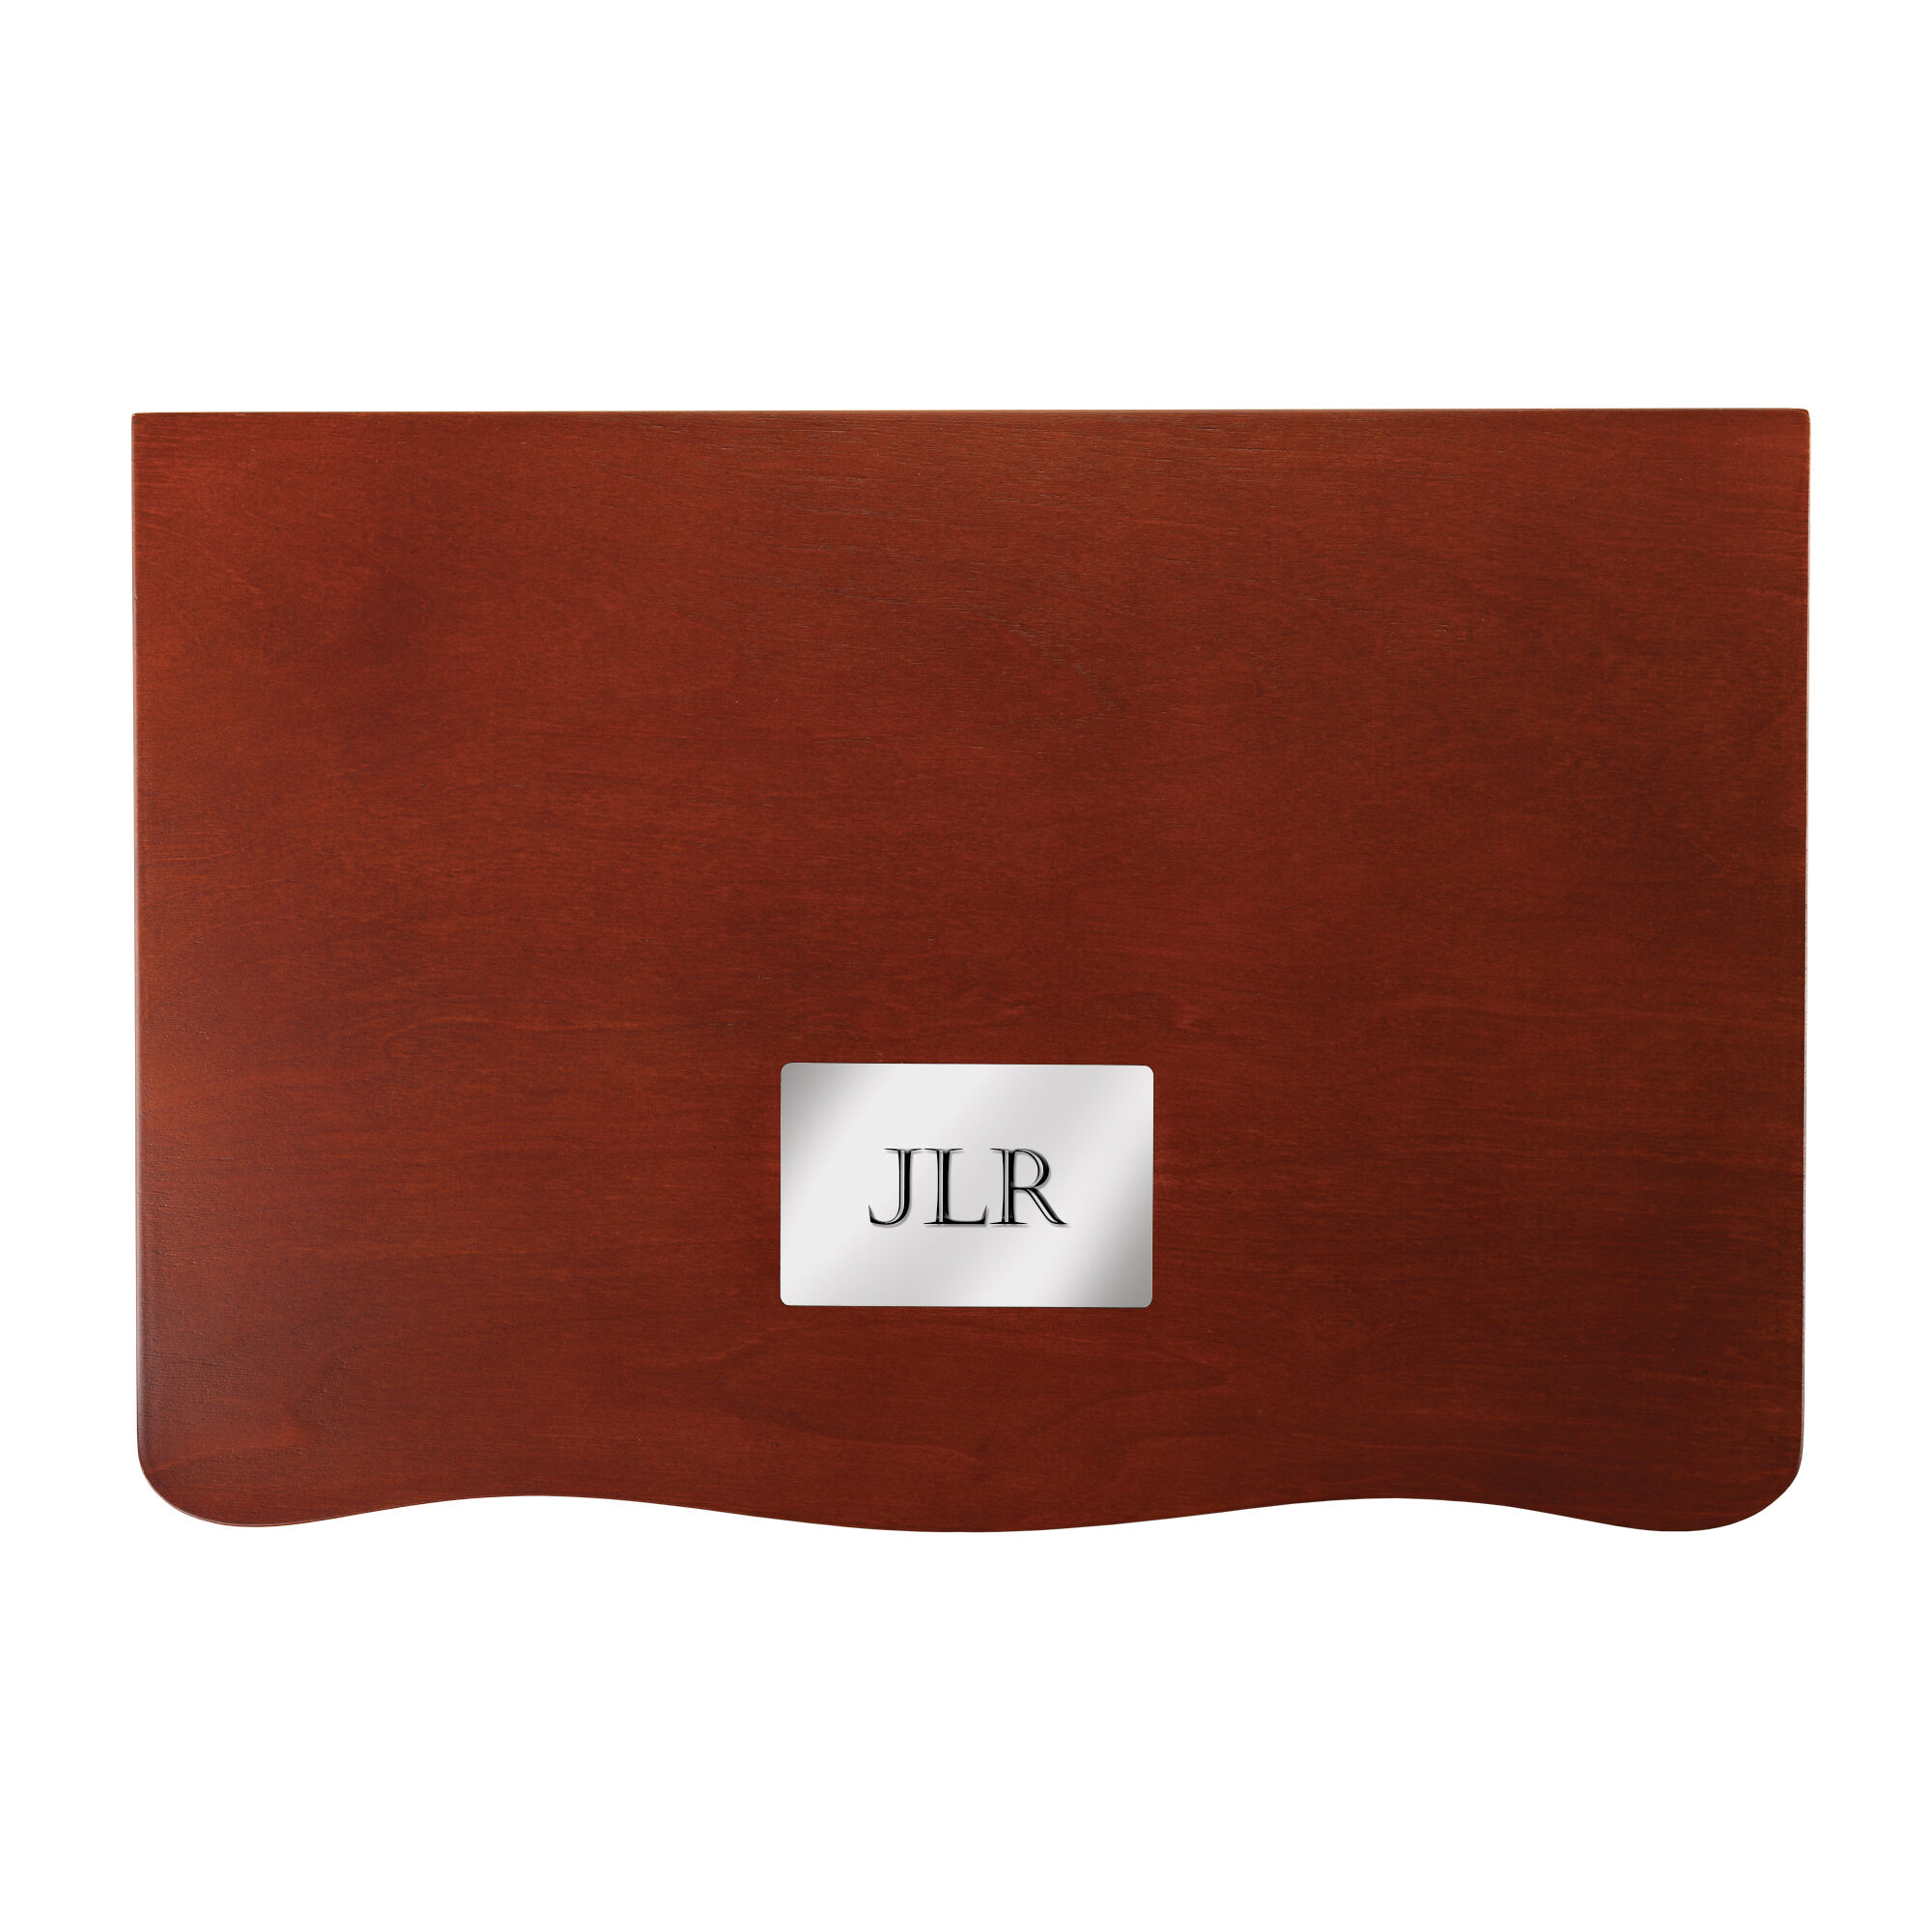 The Personalized Ultimate Jewelry Box 5665 0013 f plaque